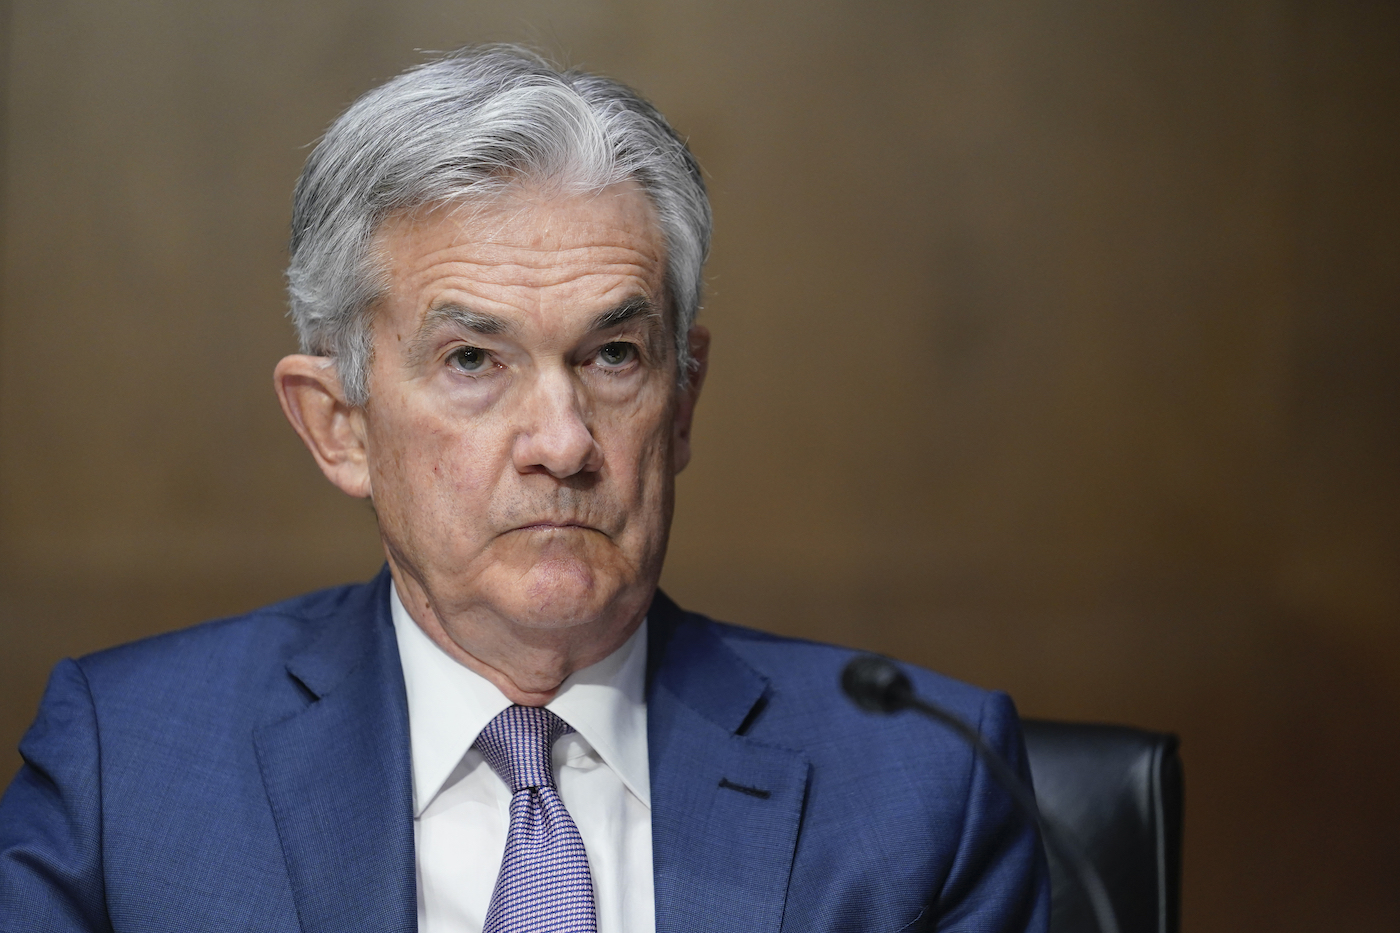 Cryptocurrency Regulation Needed to Prevent Terrorist Financing, According to Fed Chair Jerome Powell